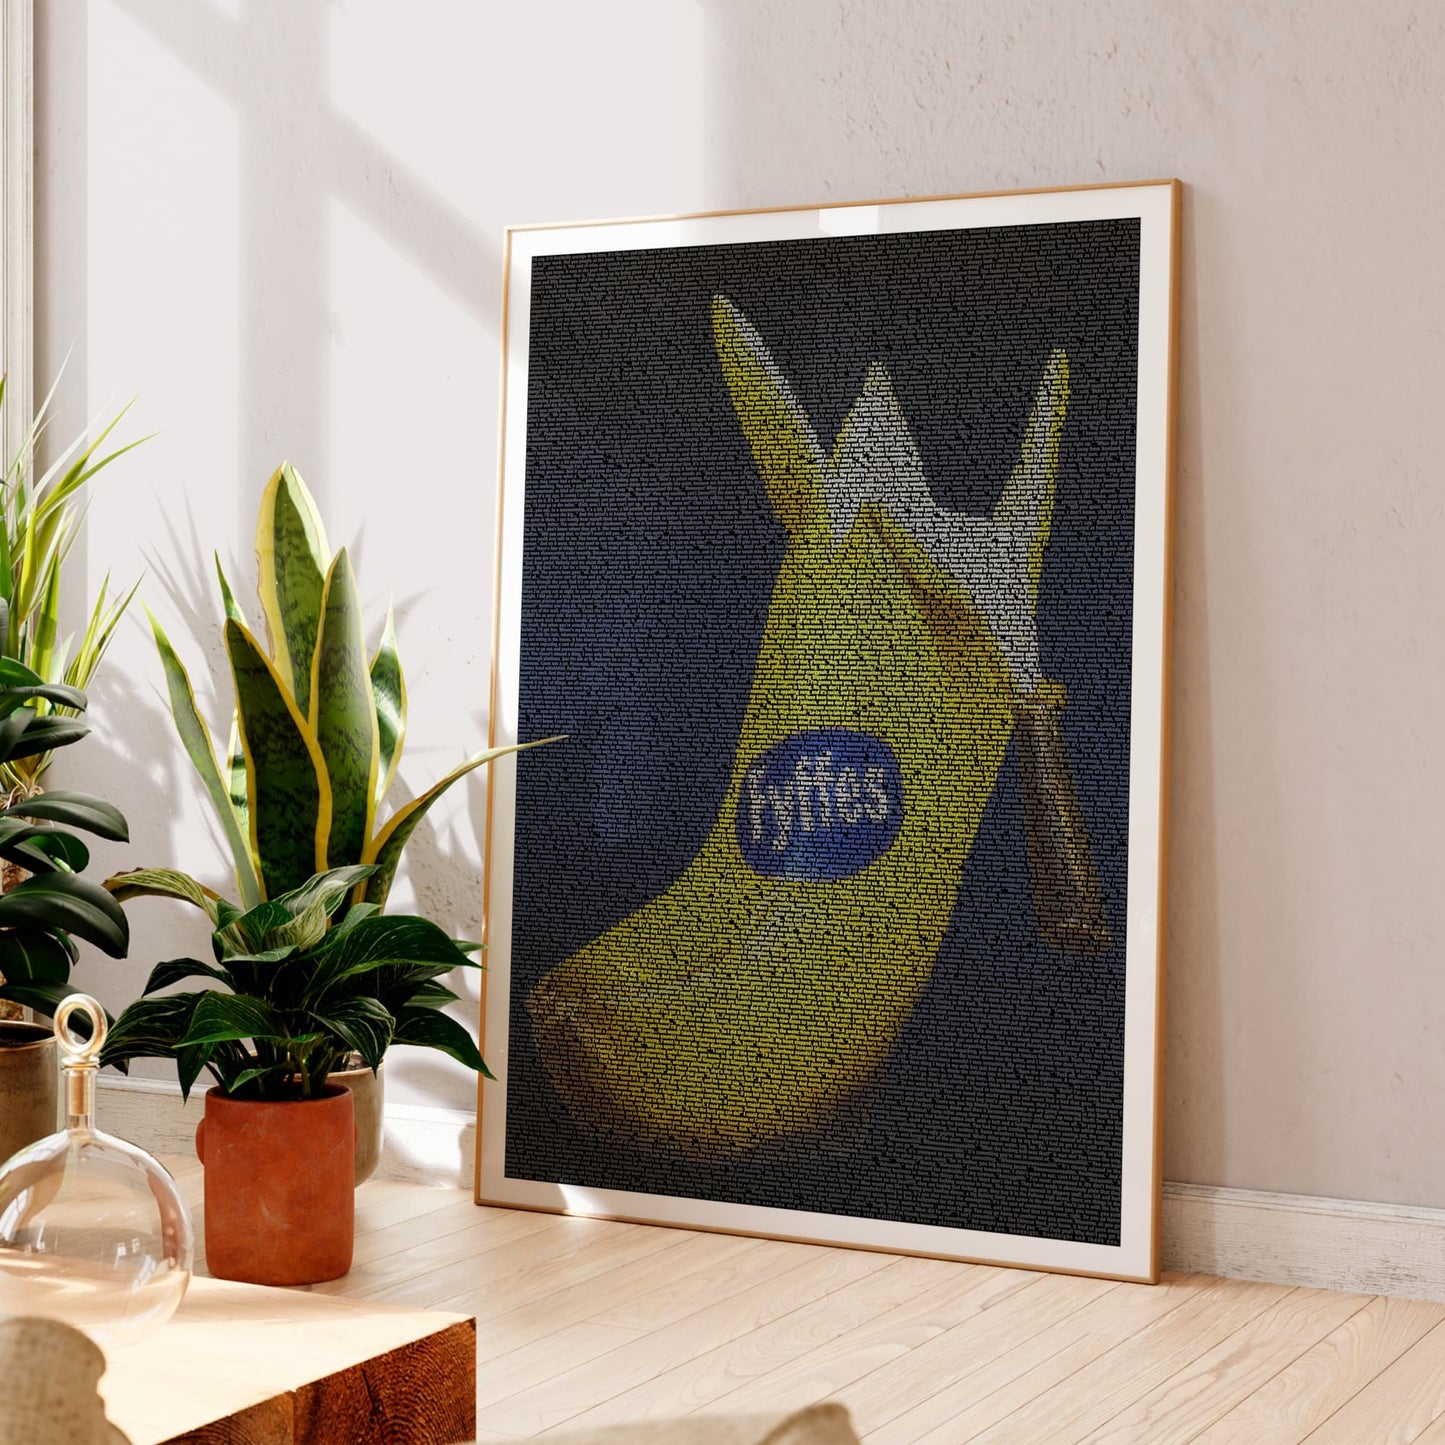 A framed art print featuring Billy Connolly's Big Banana Boot